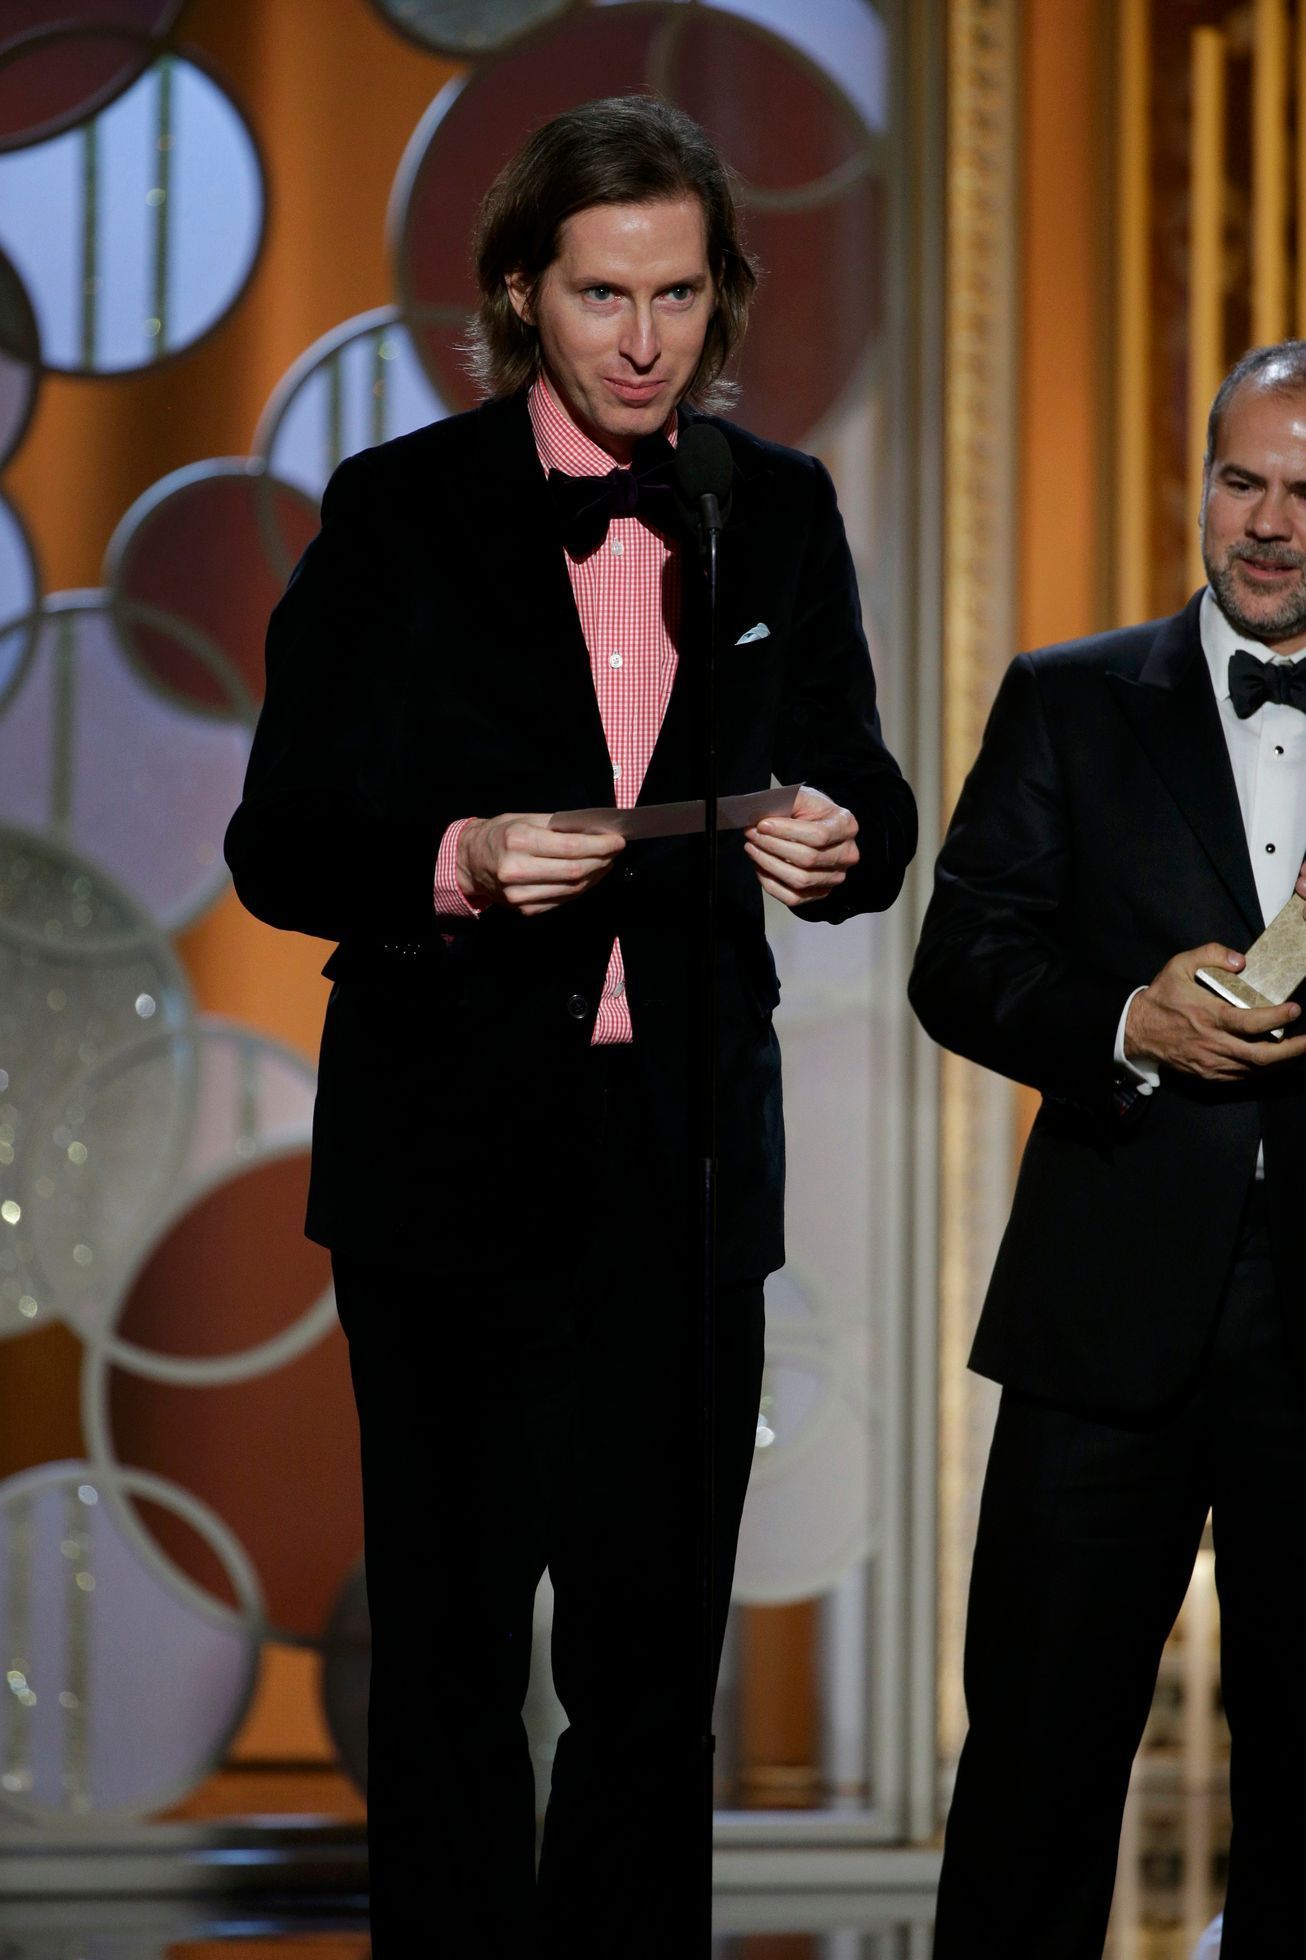 Director and producer Wes Anderson accepts the Golden Globe Award for Best Motion Picture - Comedy for &quot;The Grand Budapest Hotel&quot; at the 72nd Golden Globe Awards in Beverly Hills